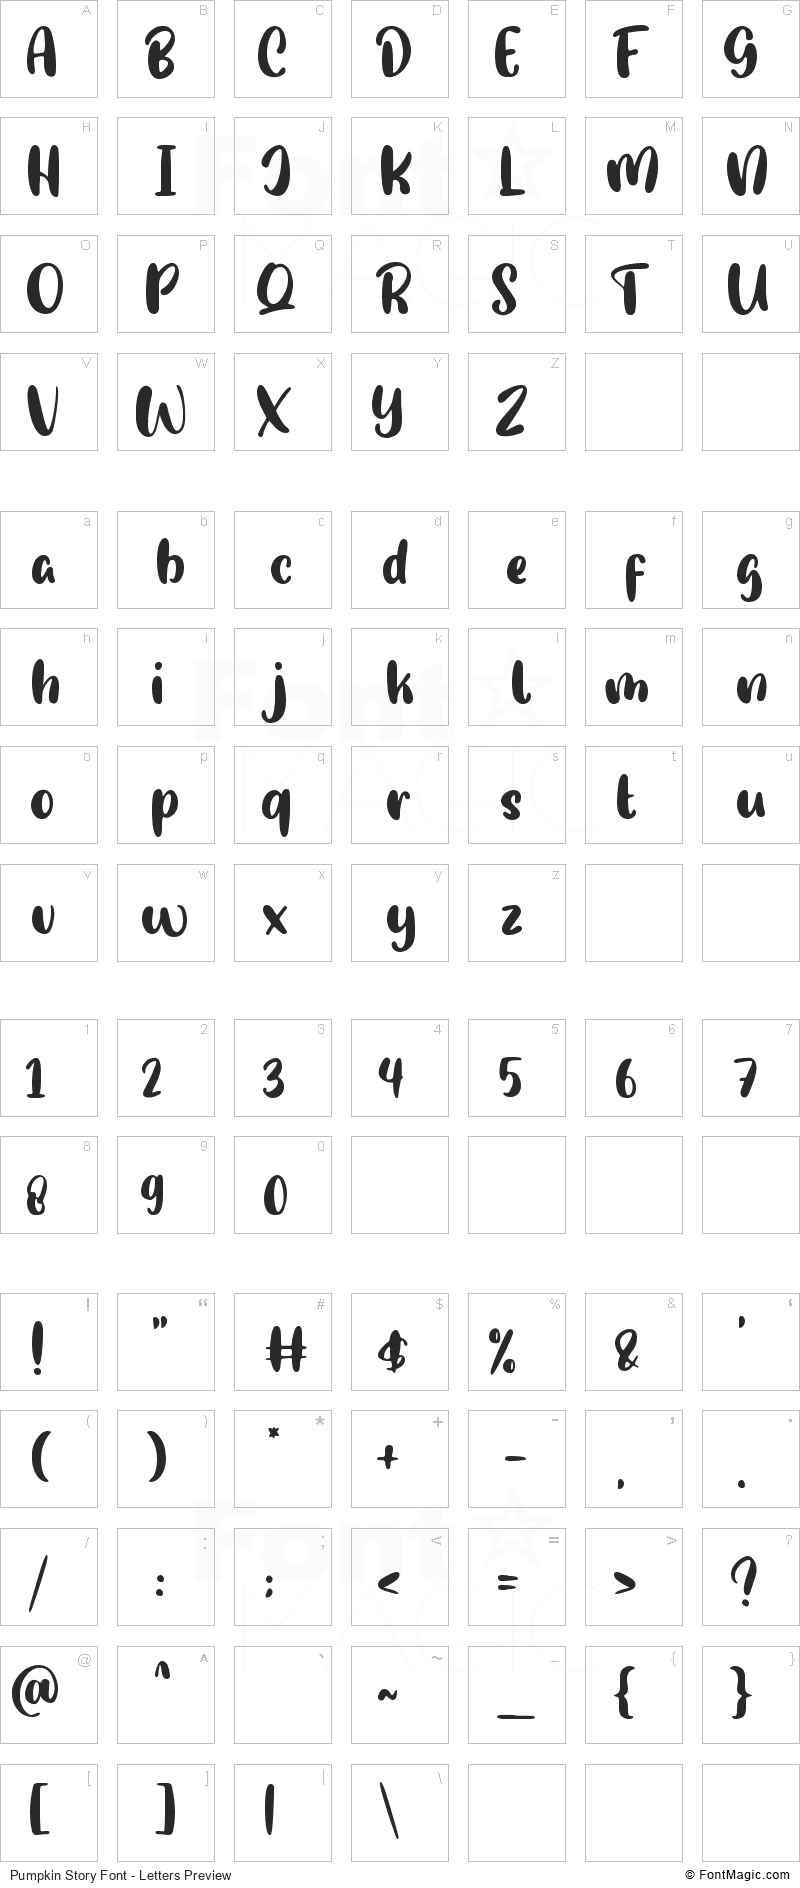 Pumpkin Story Font - All Latters Preview Chart